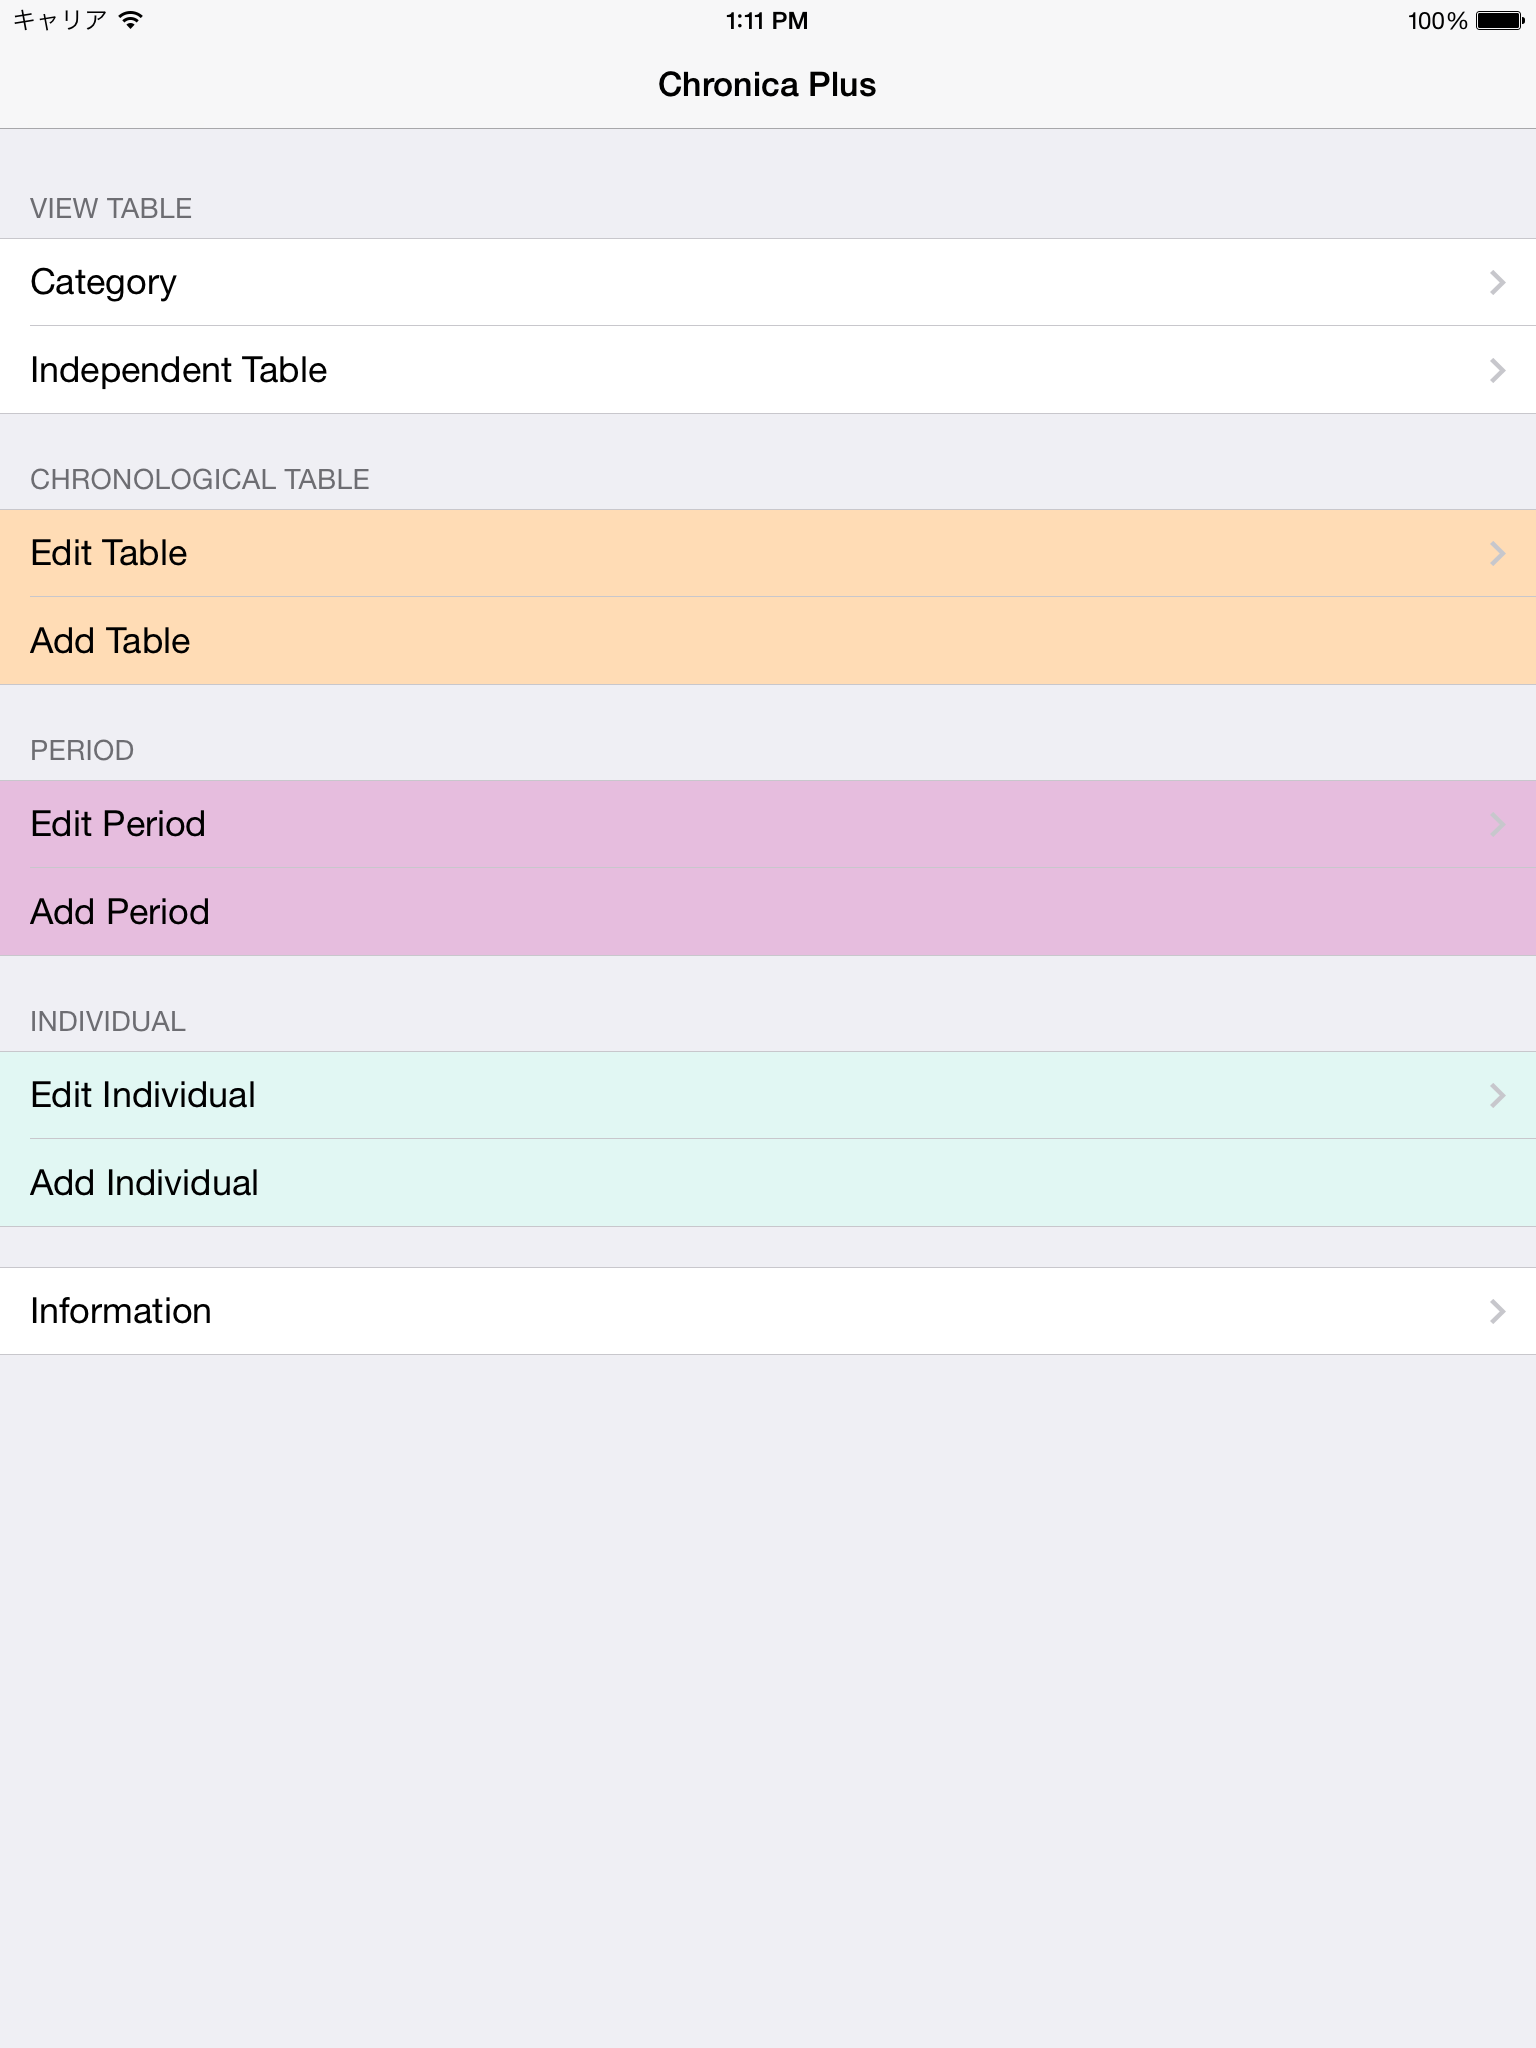 The main menu of Timeline Editor: Chronica Plus for iOS